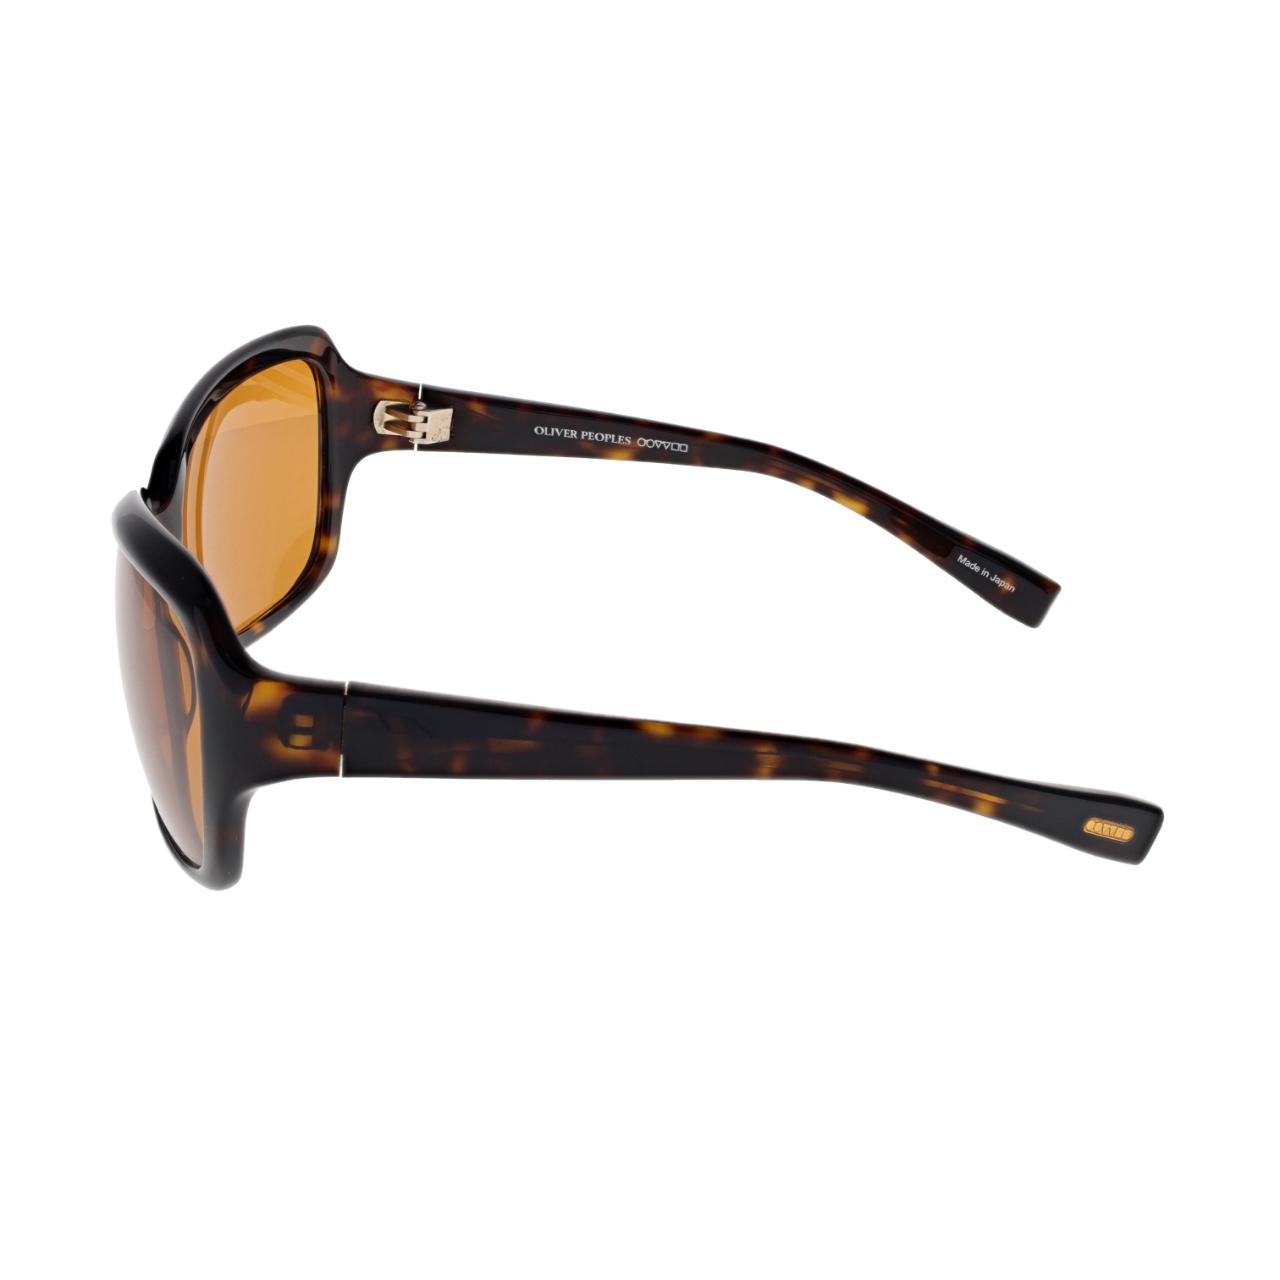 Product Image 3 - OLIVER PEOPLES DUNAWAY SUNGLASSES -